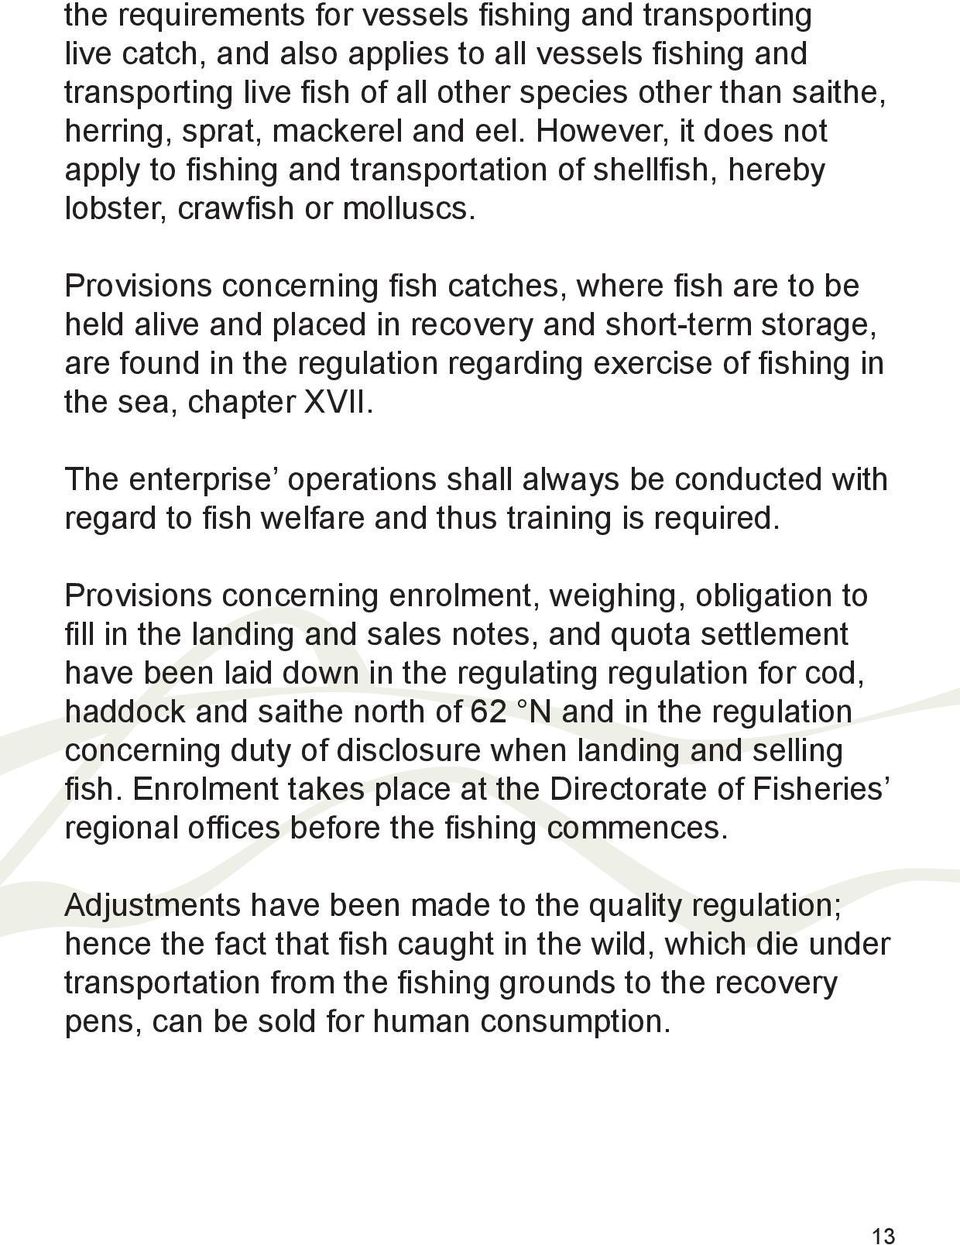 Provisions concerning fish catches, where fish are to be held alive and placed in recovery and short-term storage, are found in the regulation regarding exercise of fishing in the sea, chapter XVII.